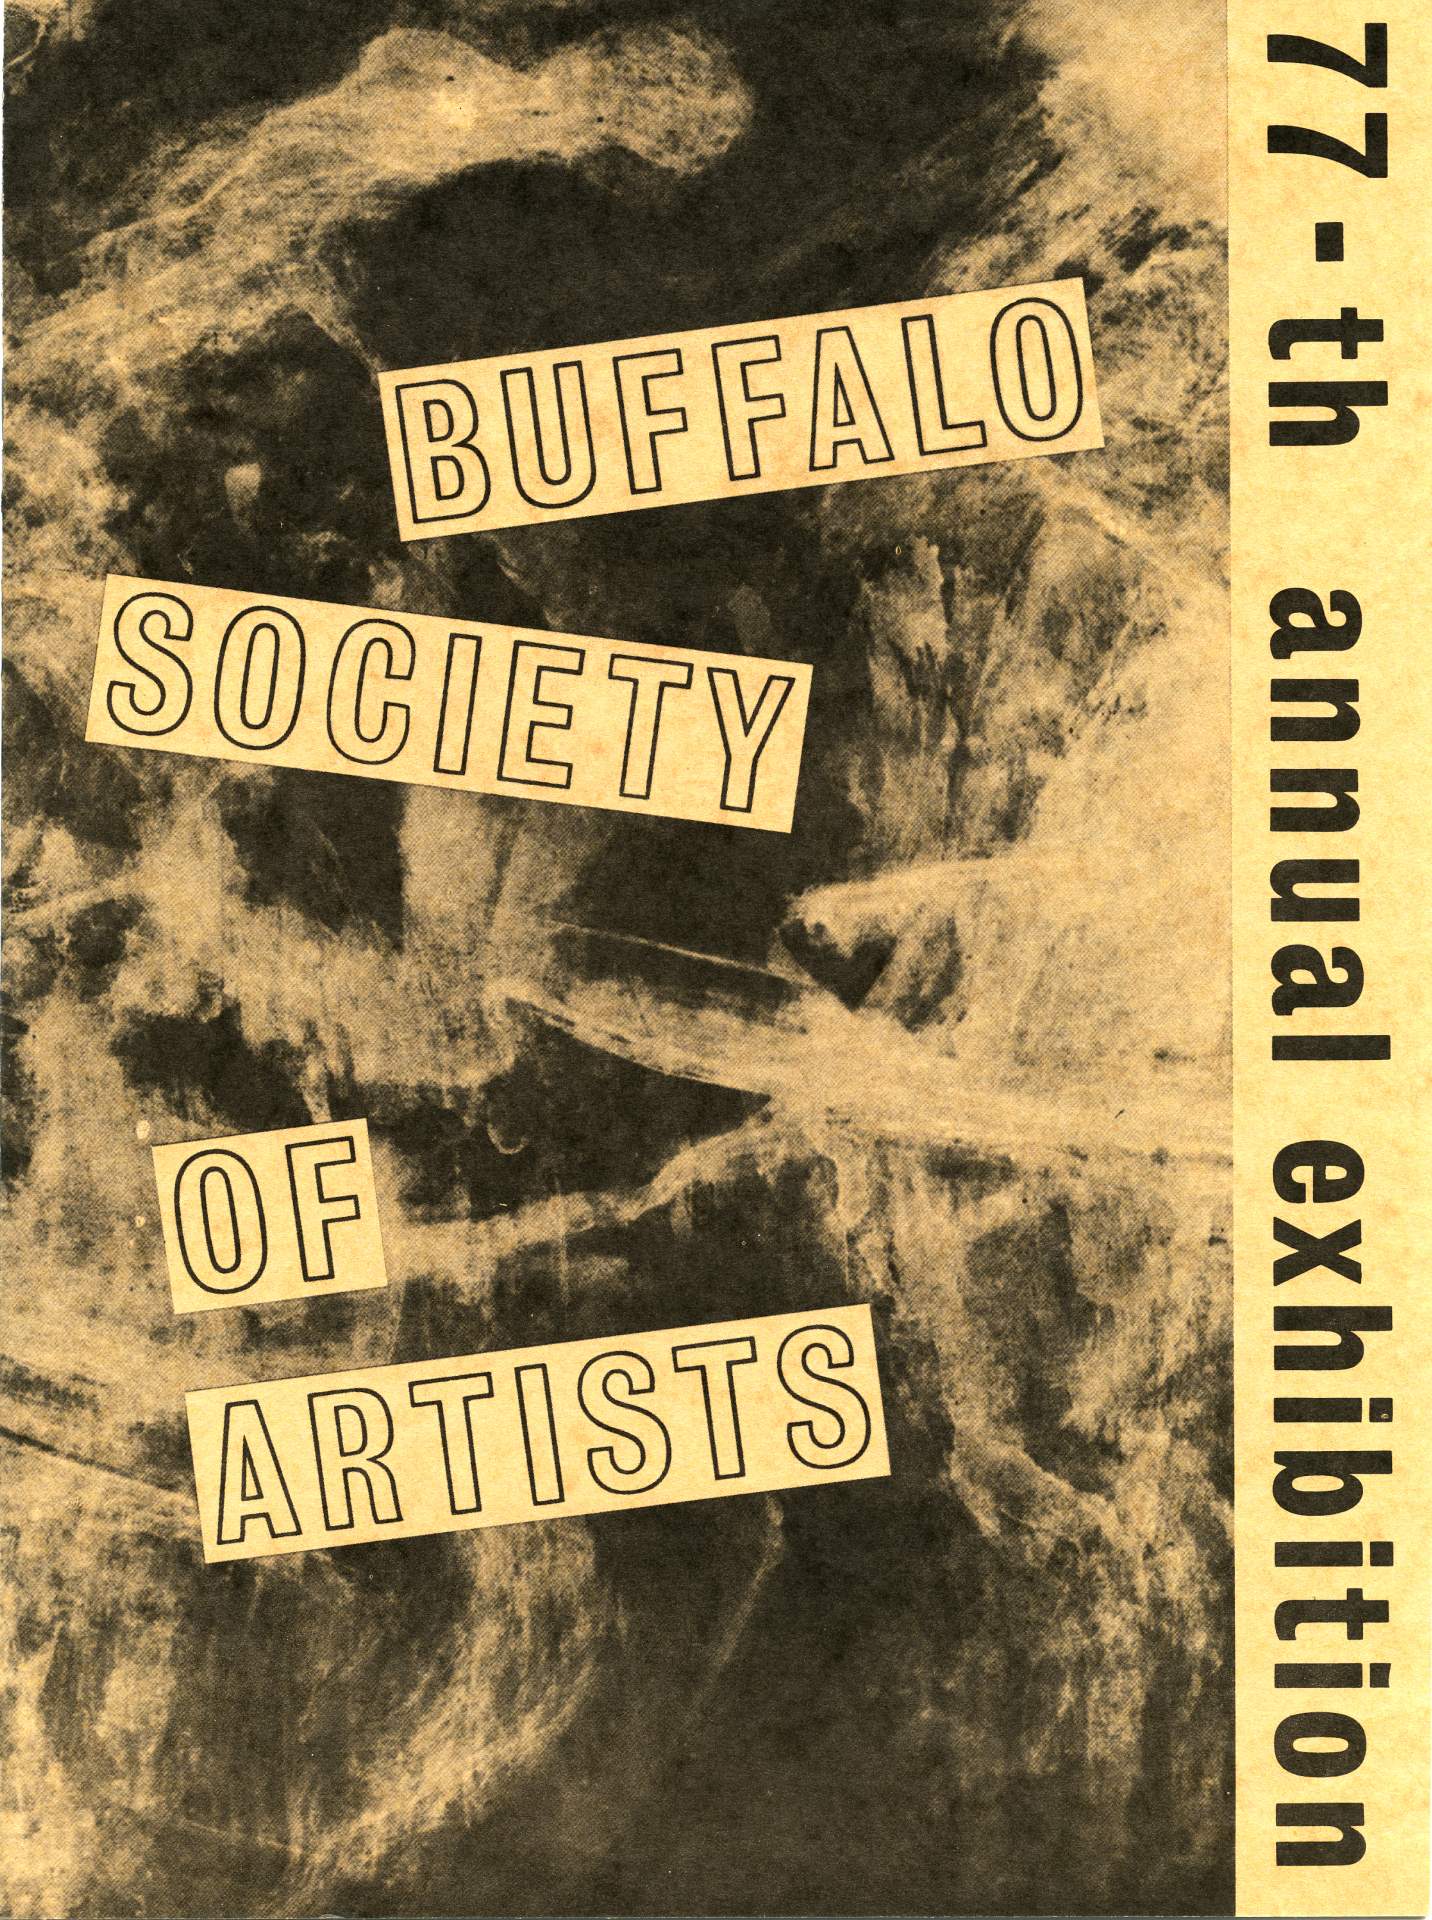 Buffalo Society of Artists 77th Annual Exhibition program cover